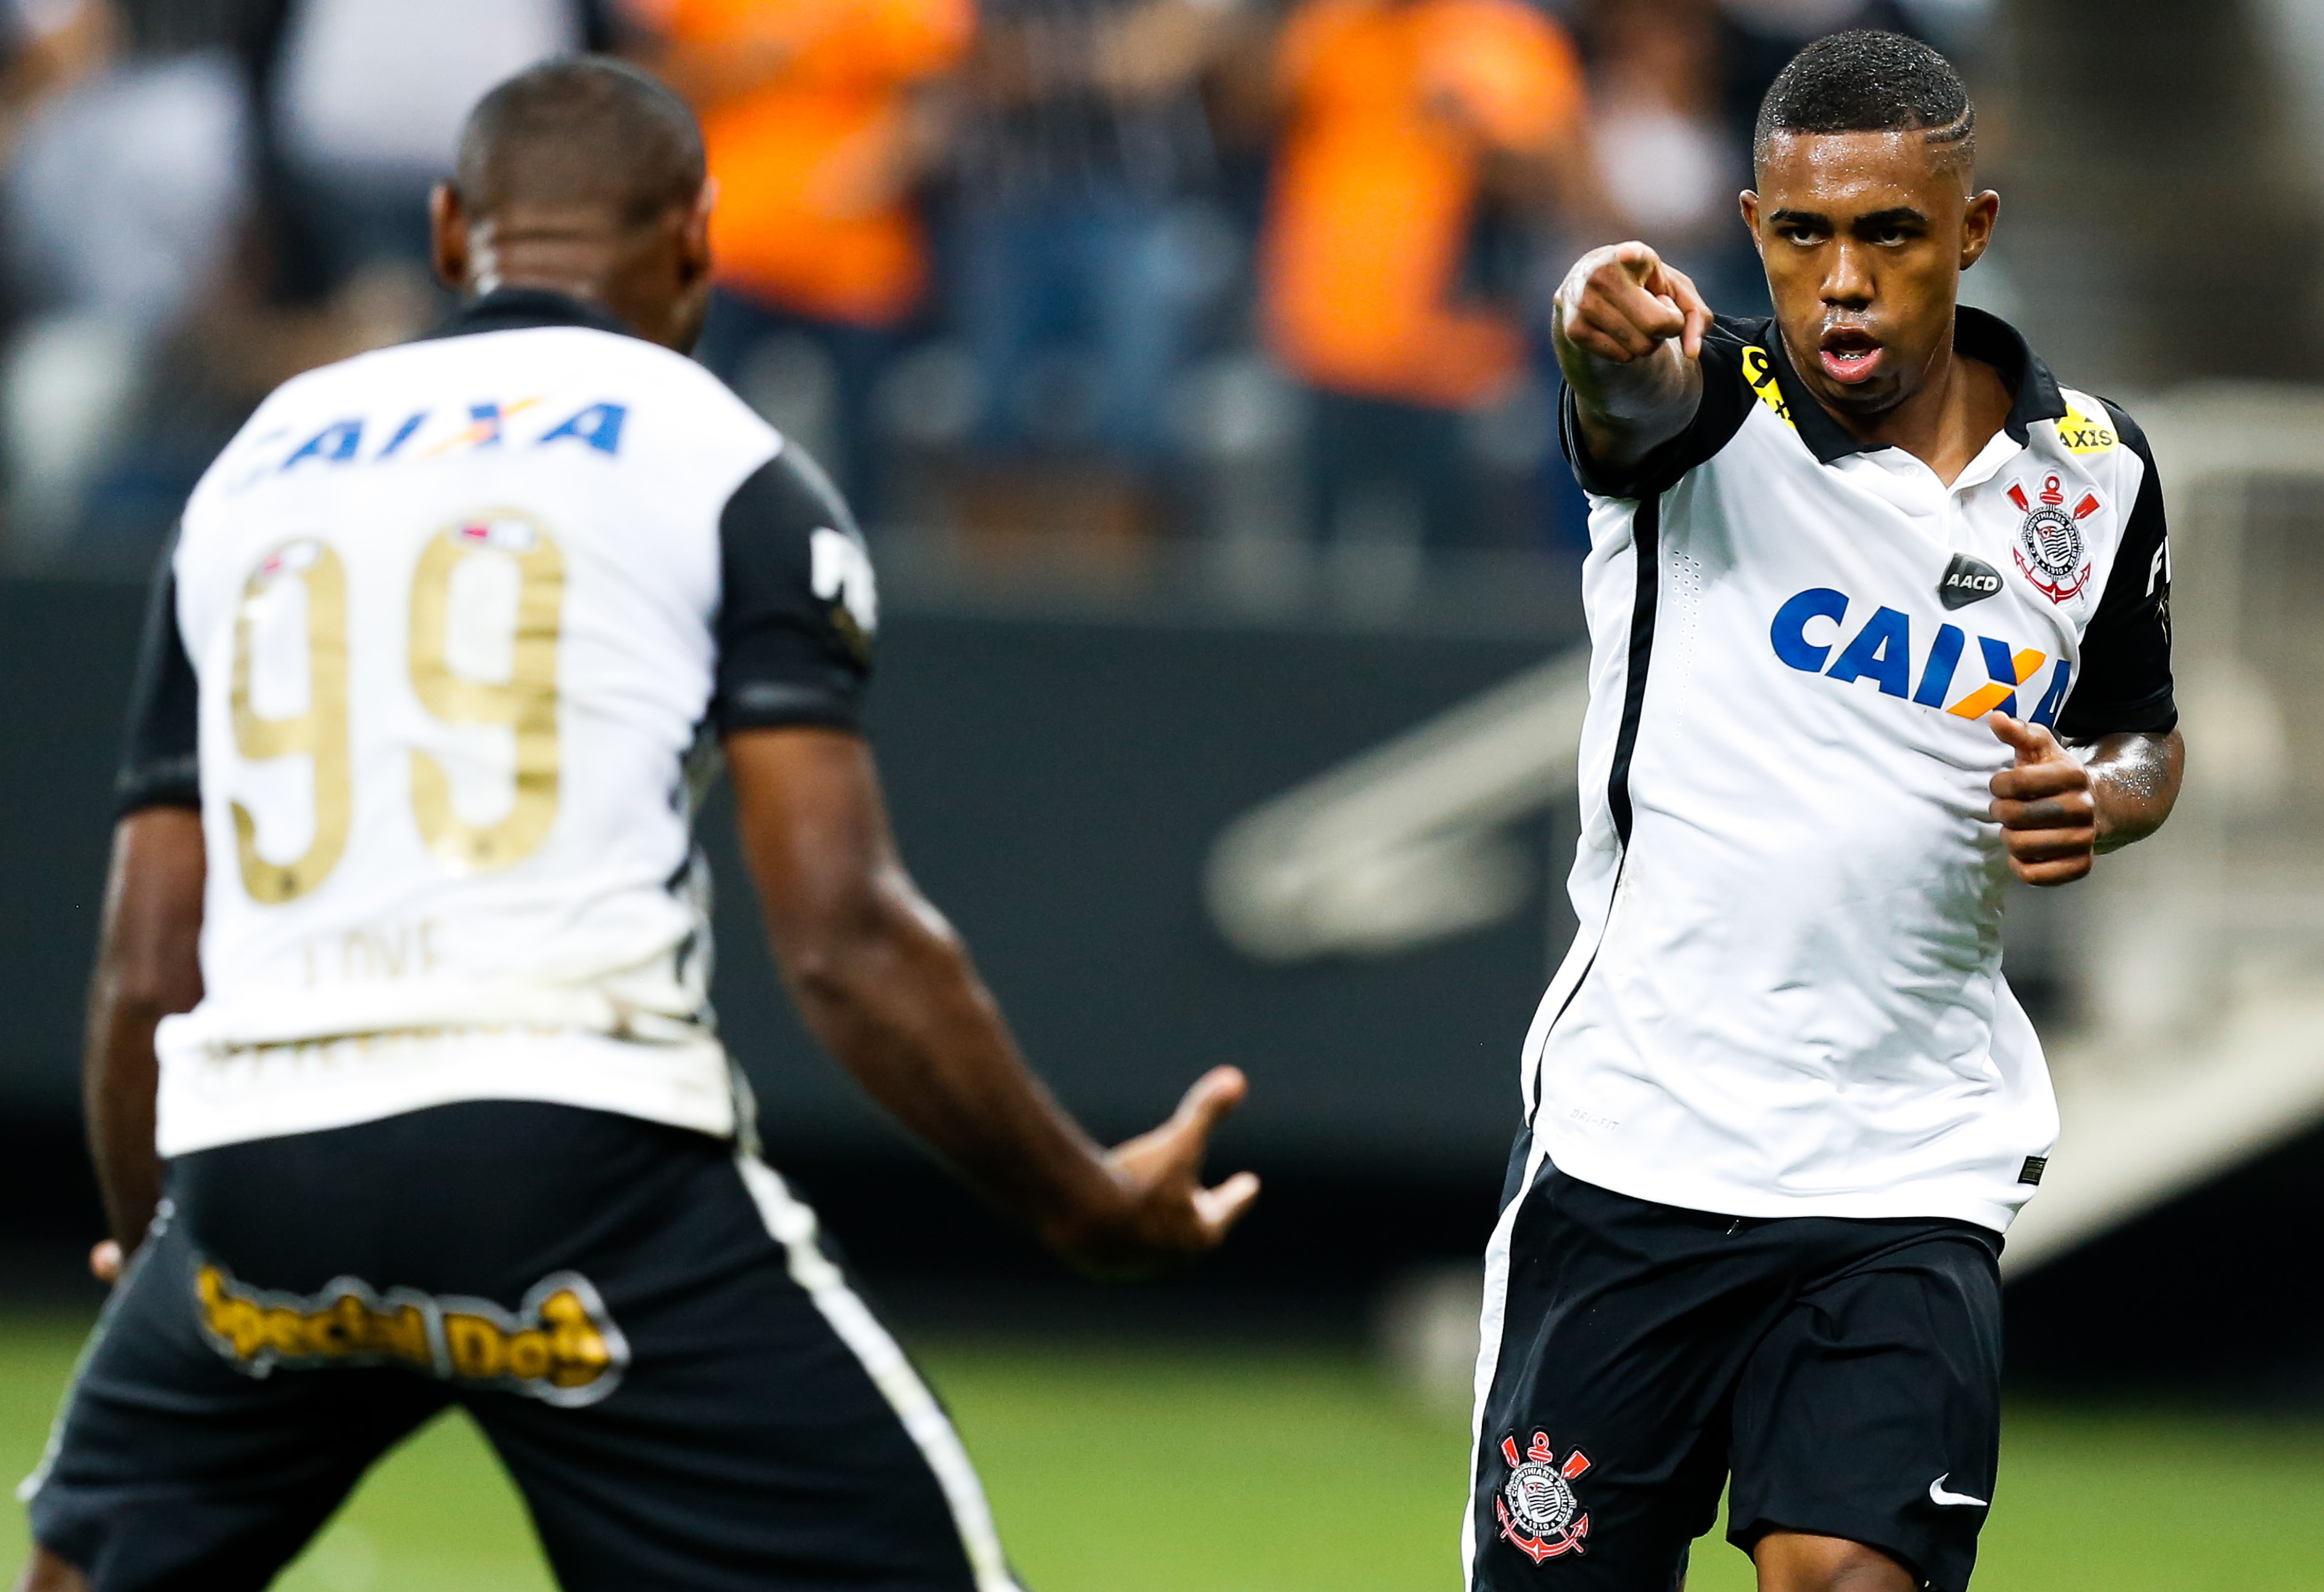 SAO PAULO, BRAZIL - OCTOBER 15: Malcom #21 of Corinthians celebrates their second goal during the match between Corinthians and Goias for the Brazilian Series A 2015 at Arena Corinthians stadium on October 15, 2015 in Sao Paulo, Brazil. (Photo by Alexandre Schneider/Getty Images)